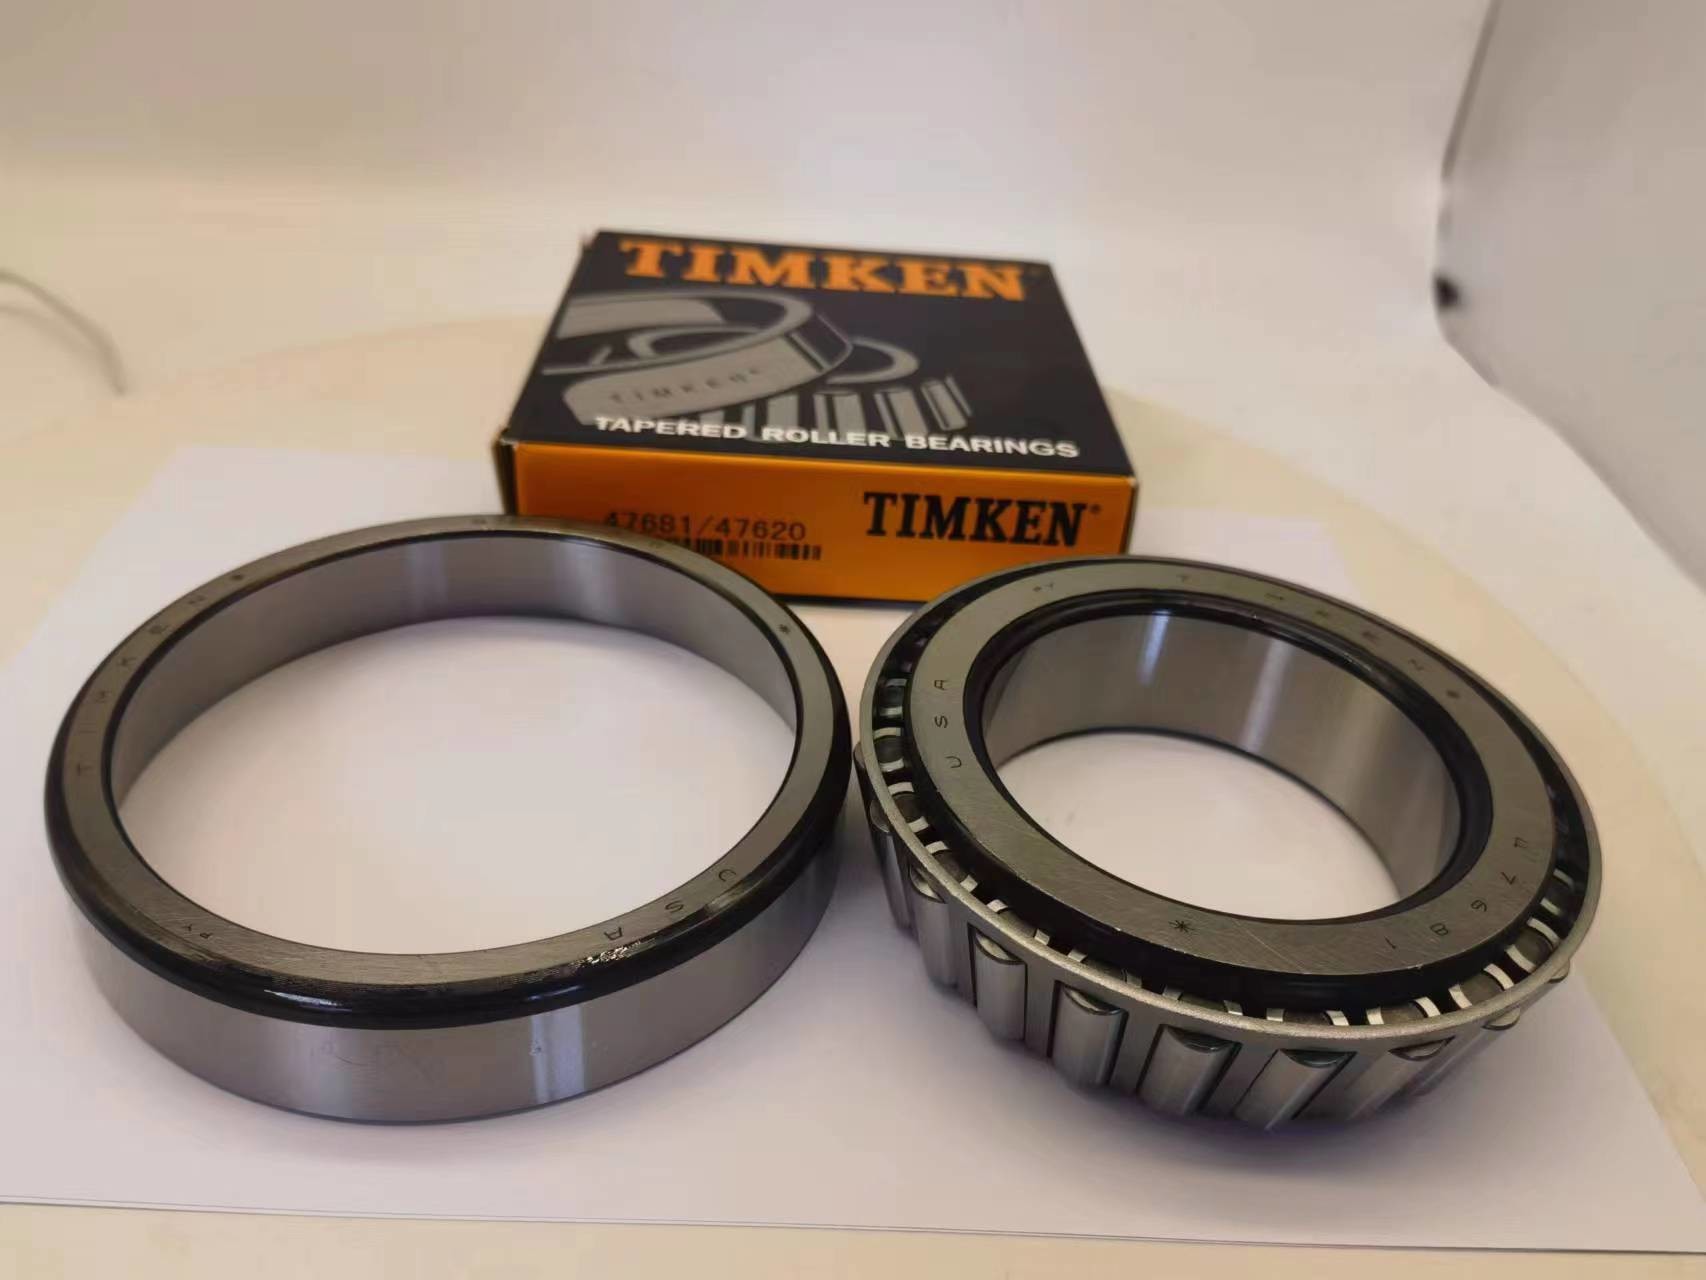 47681 / 47620 Tapered Roller Bearing